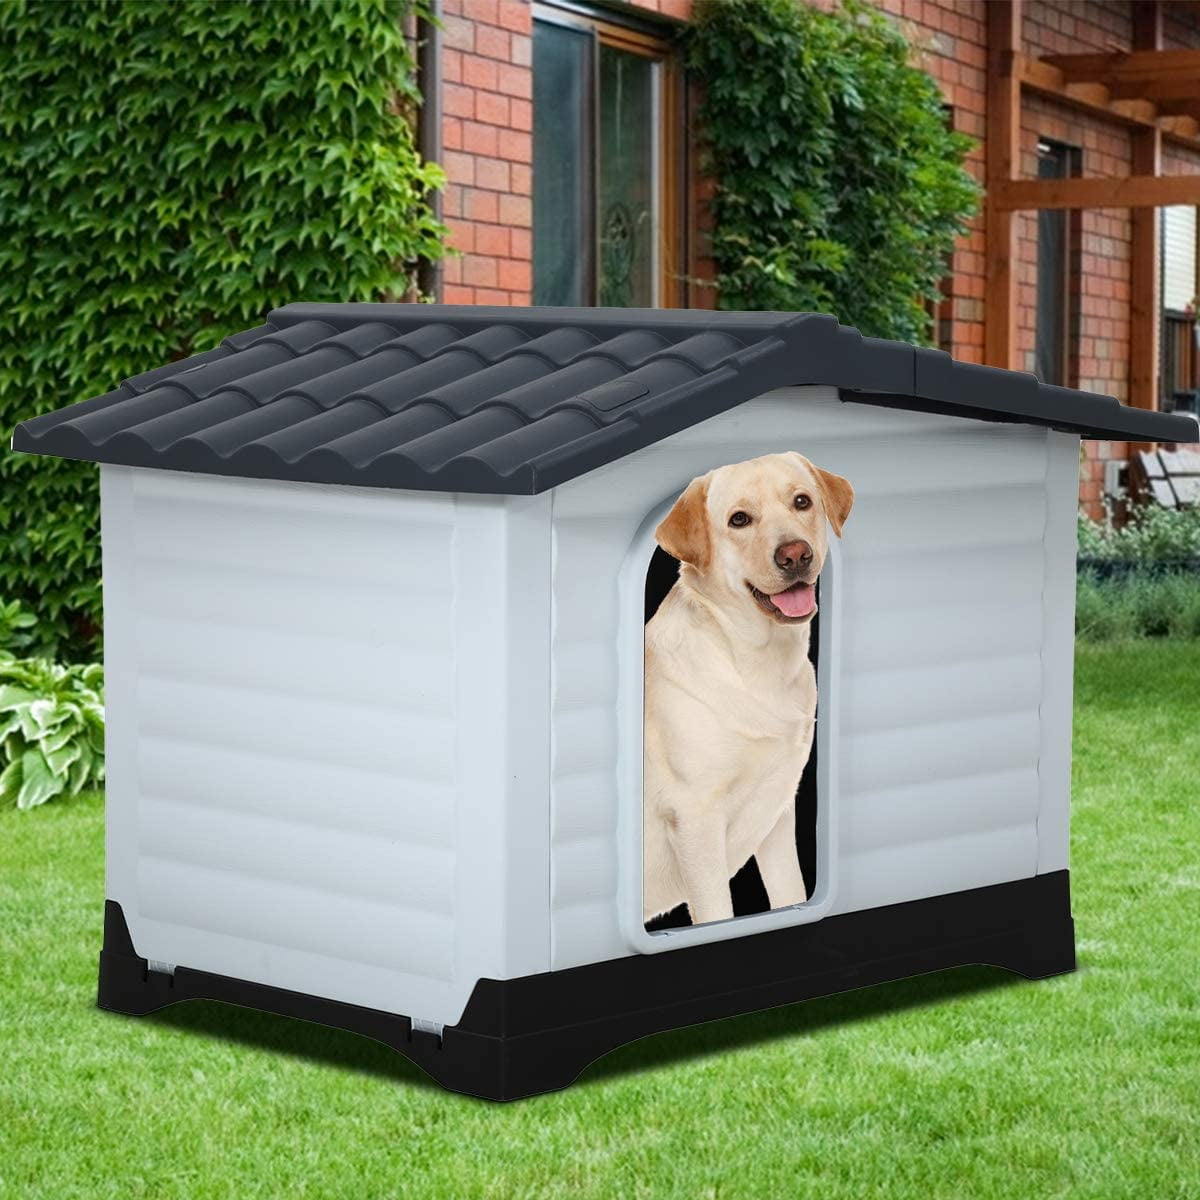 Outdoor Weather Waterproof Kennel for Small to Medium Sized Dogs Backyard Wooden Doghouse Patio Indoor Outdoor Puppy Shelter for Garden